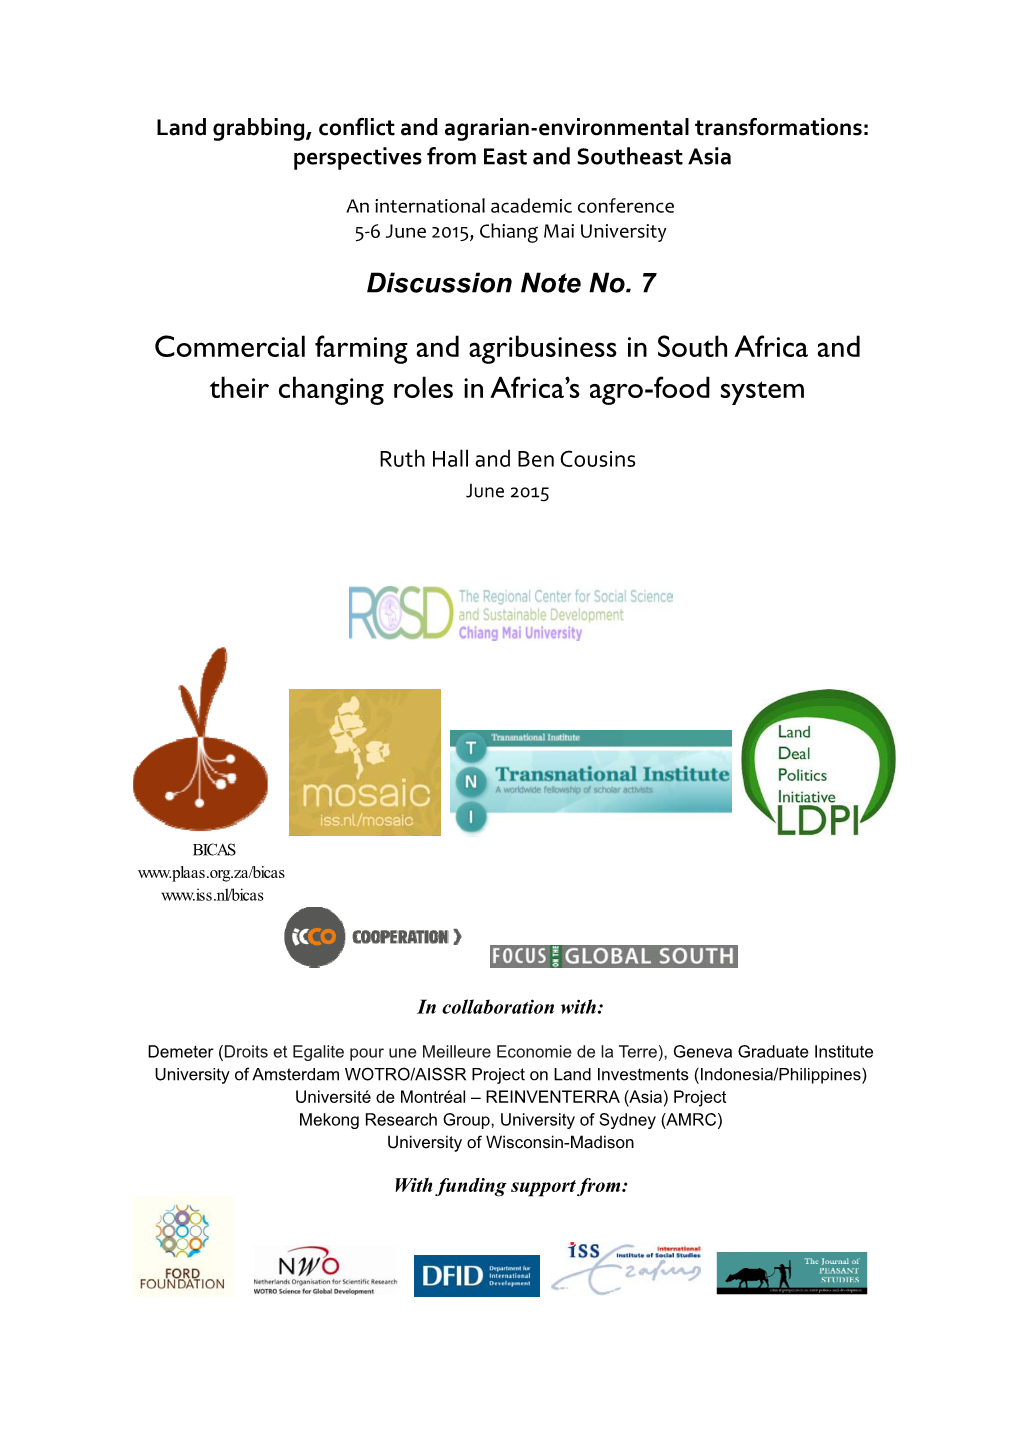 Commercial Farming and Agribusiness in South Africa and Their Changing Roles in Africa’S Agro-Food System